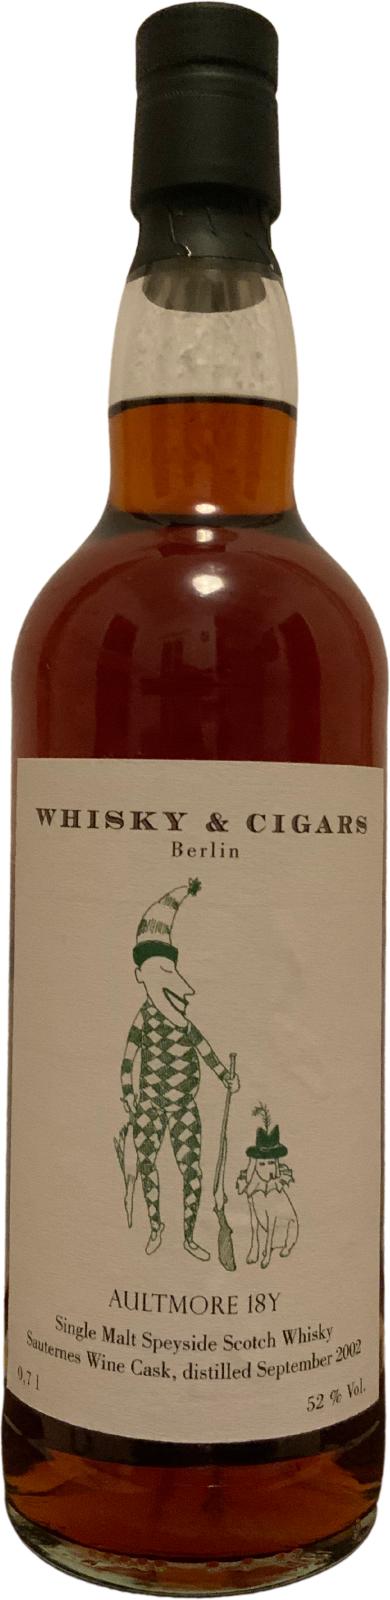 Aultmore 2002 W&C Sauternes Whisky and Cigars Berlin 52% 700ml